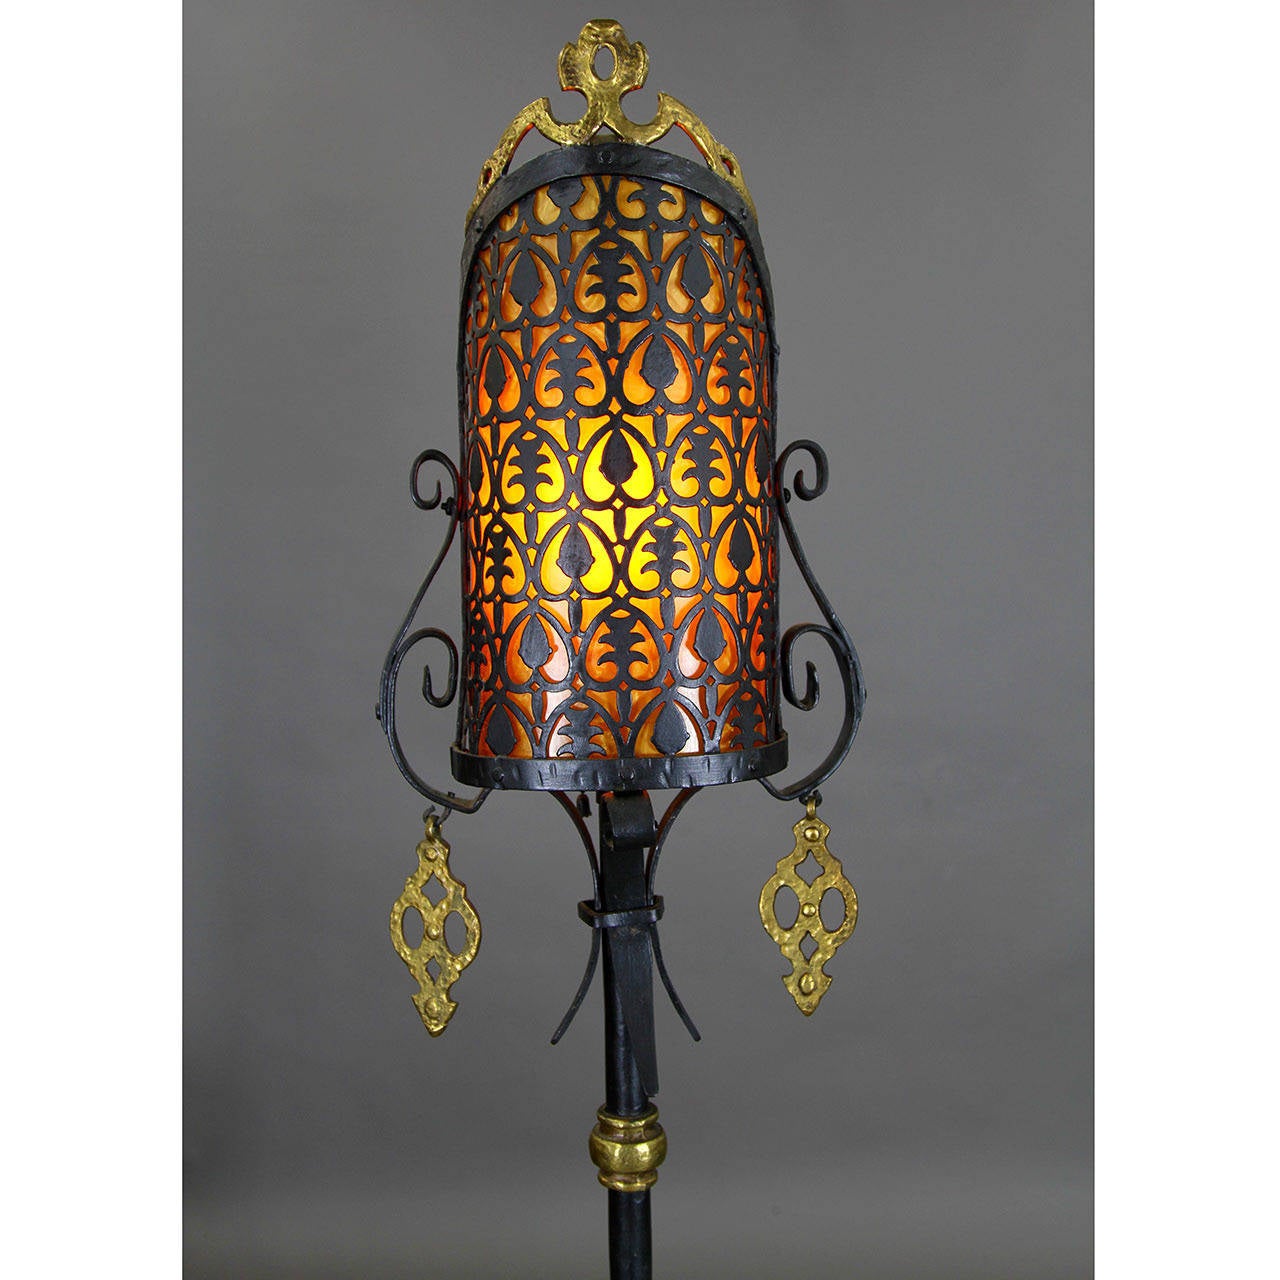 20th Century Pair of Wrought Iron Floor Lamps with Celluloid Shade Liners